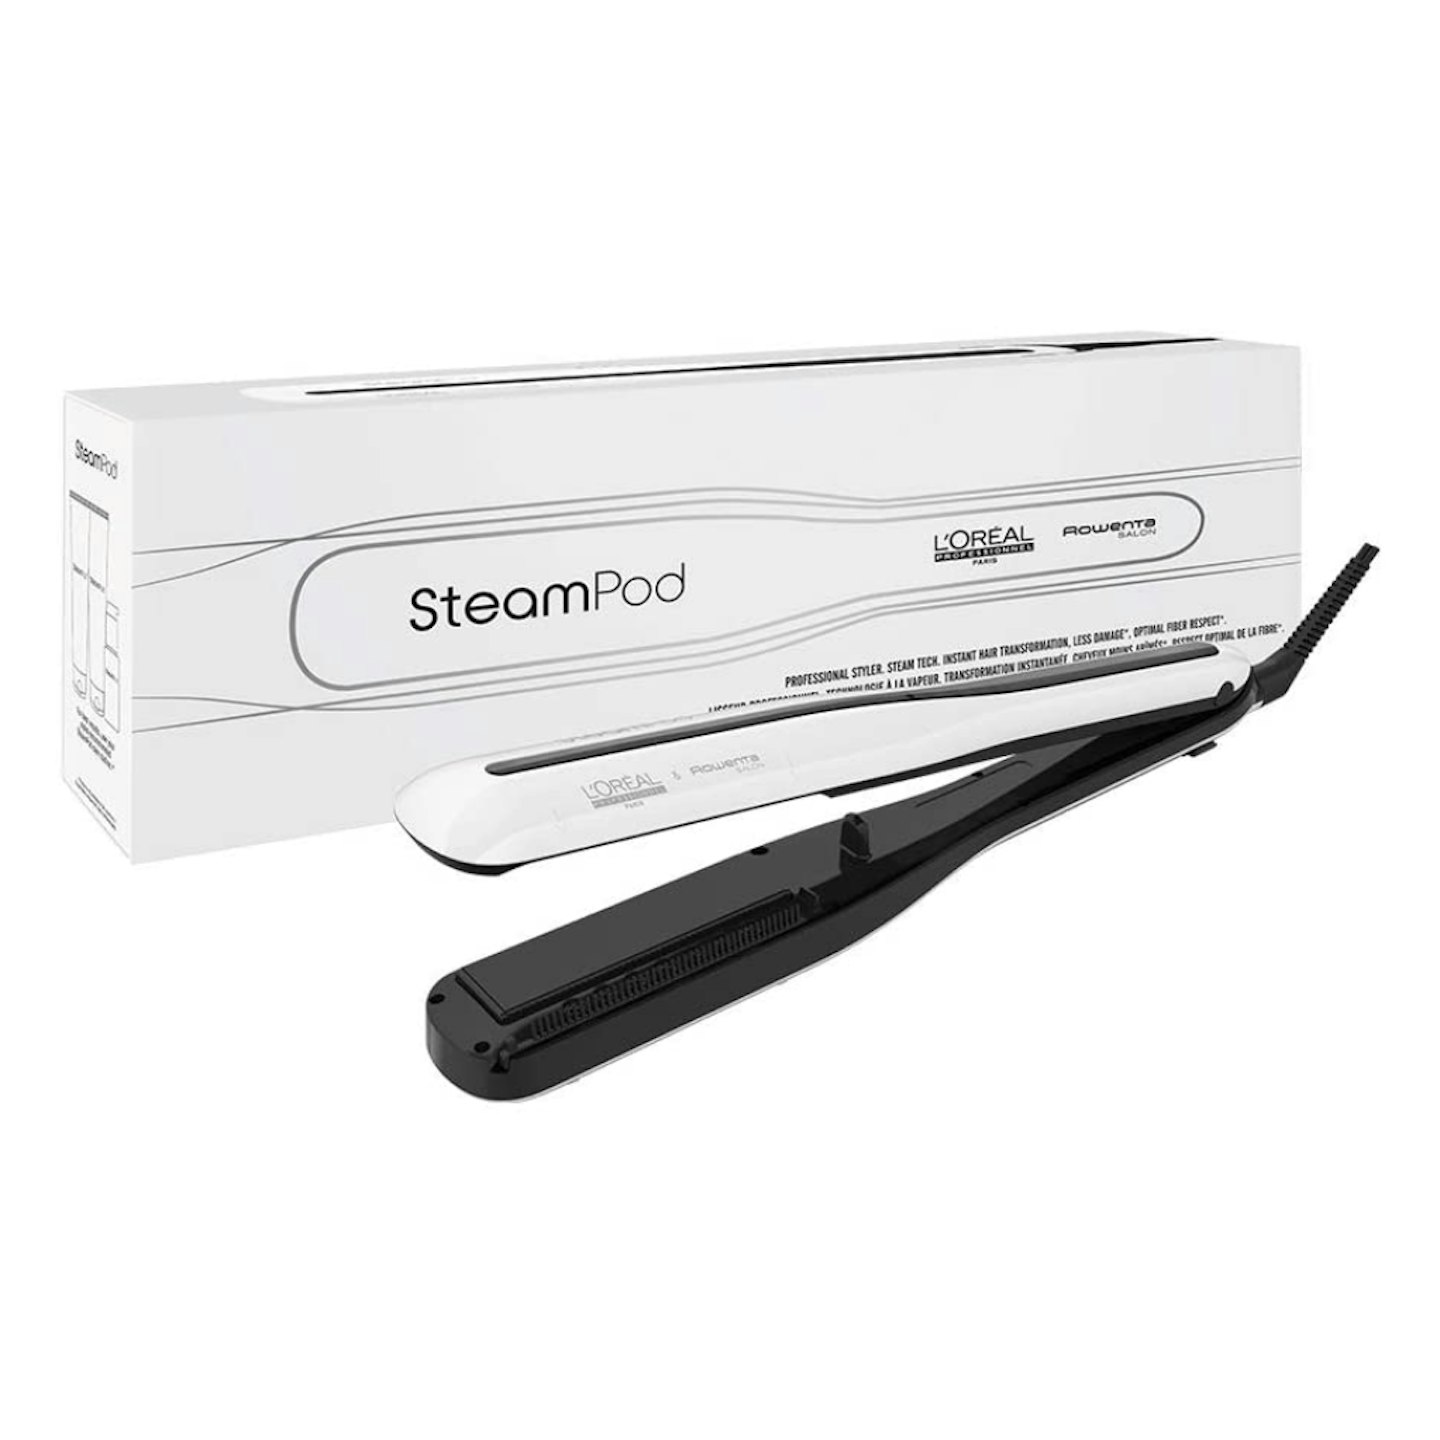 L'Oreal Professionnel Steampod 3.0 Hair Straightener and Styling tool